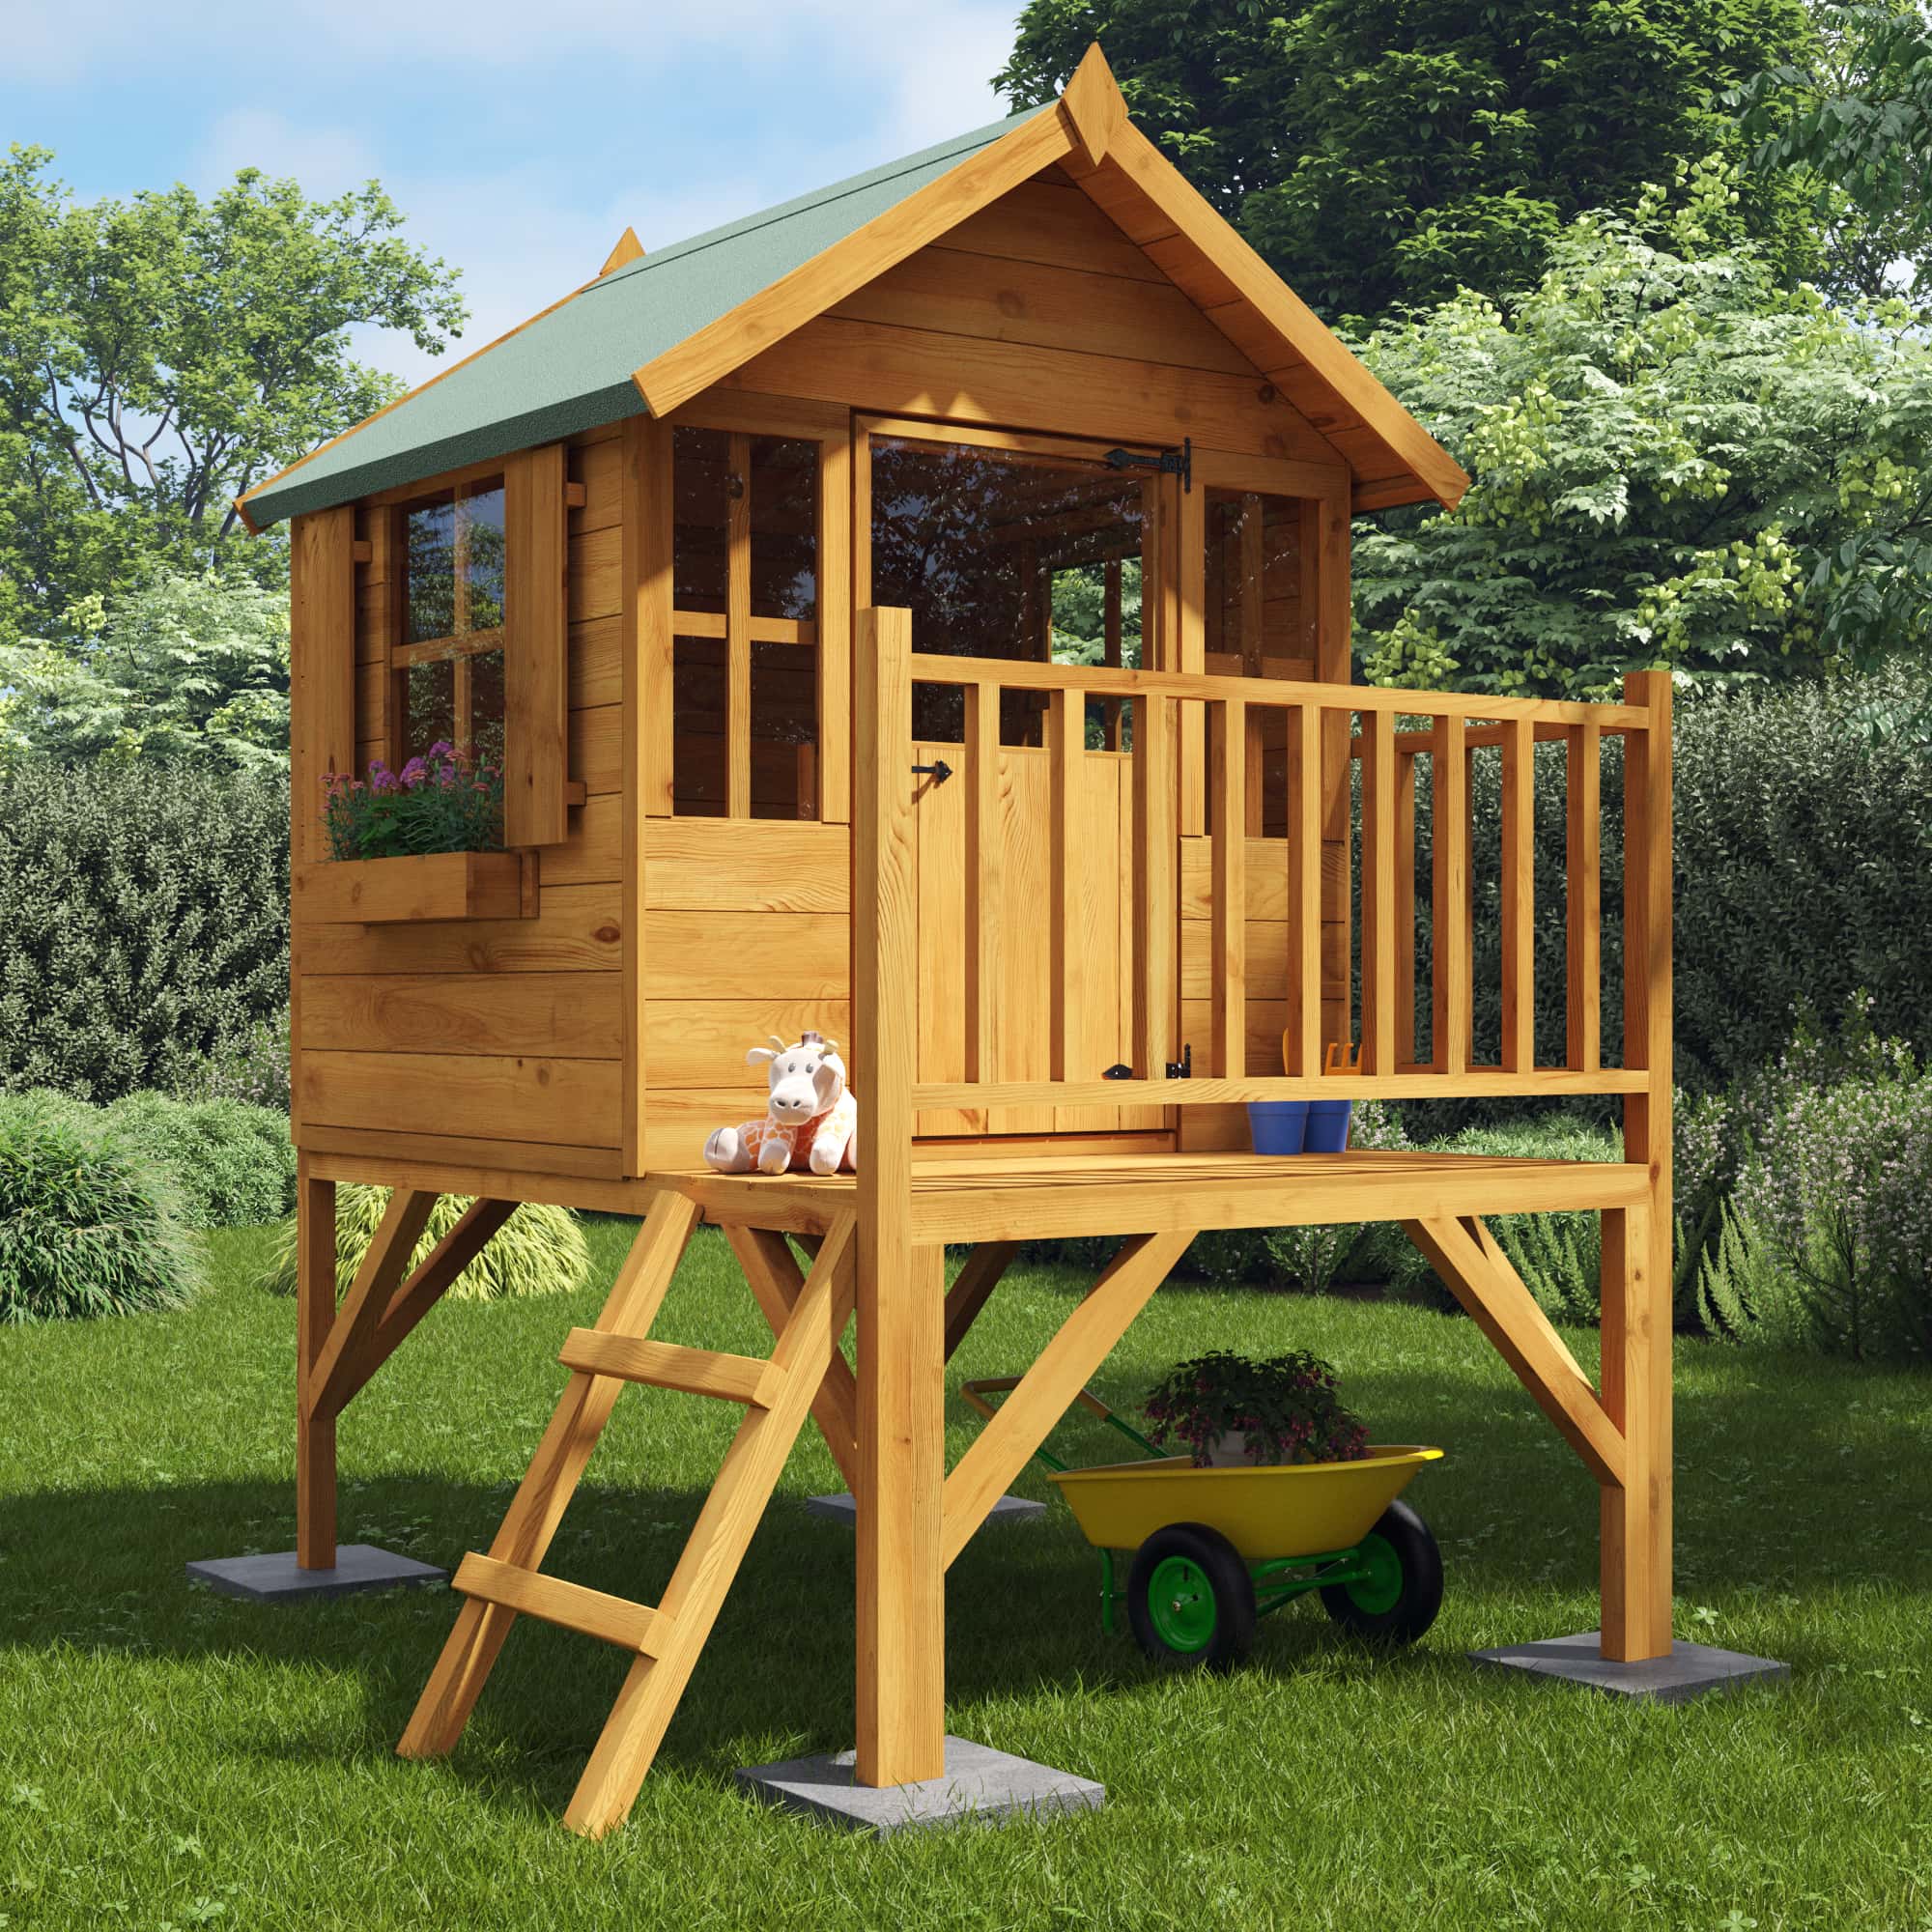 4x4 Bunny Max Tower Playhouse - BillyOh Wendyhouse